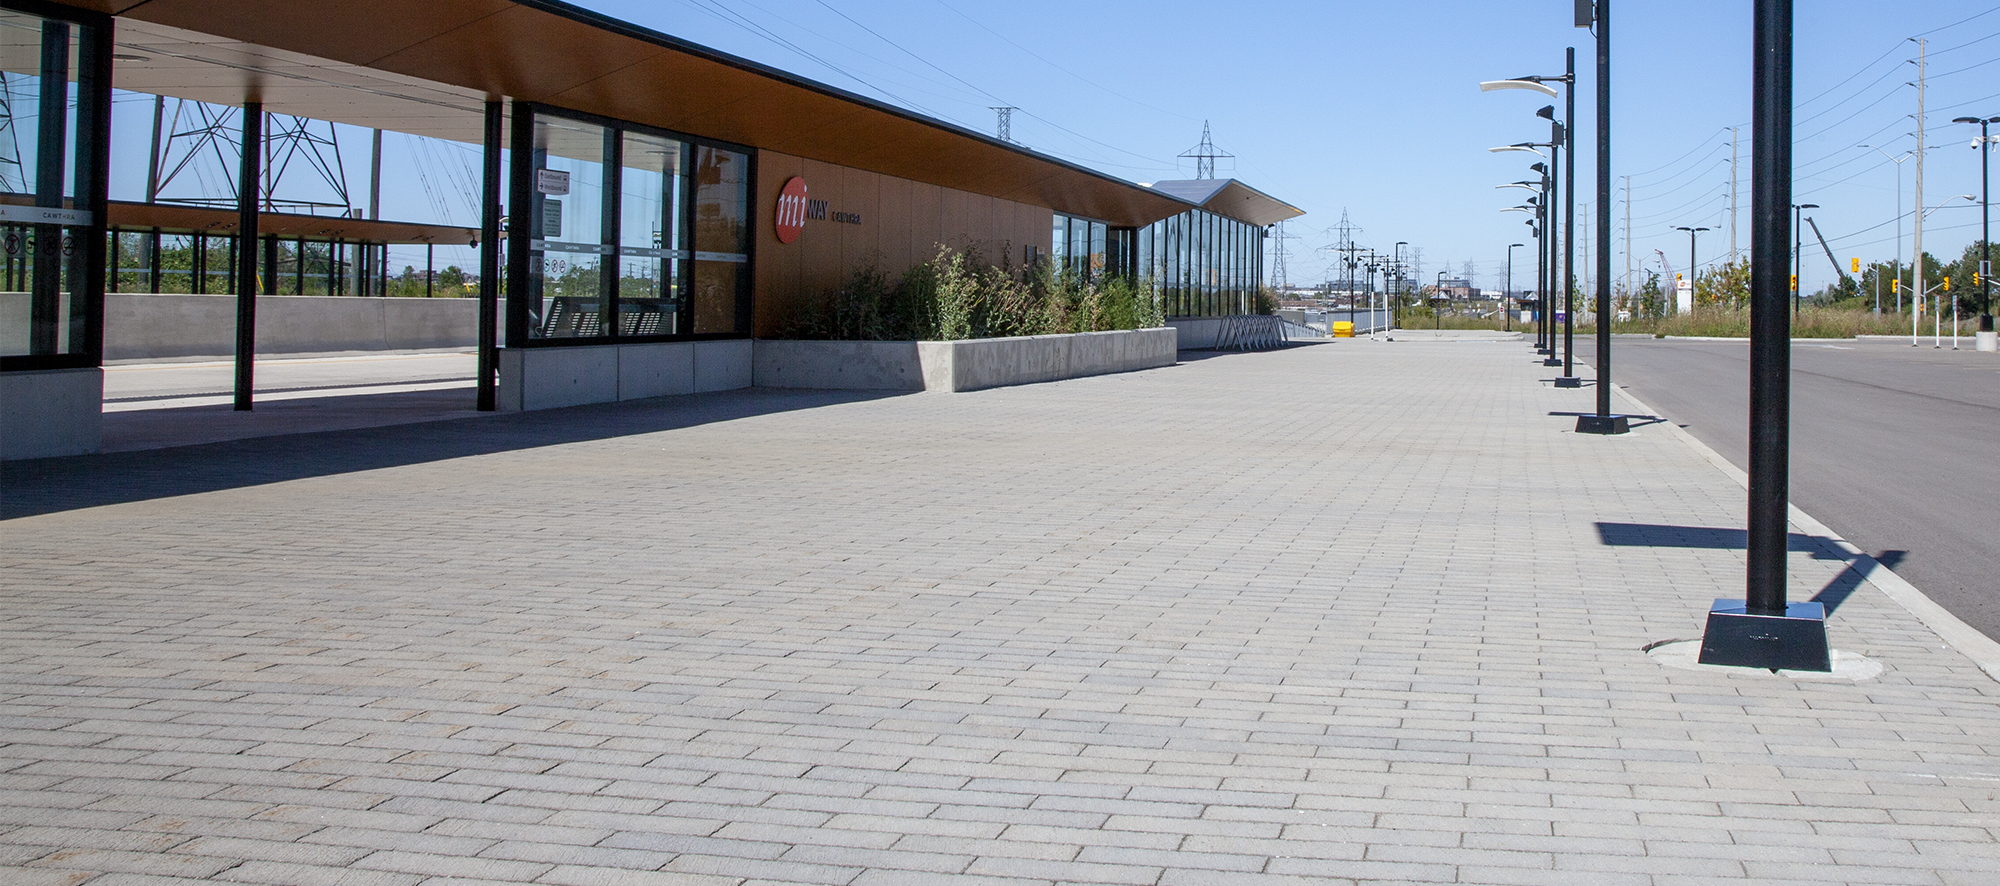 A row of streetlights cast long shadows over a bed of grey Il Campo pavers outside the station's sleek entrance.